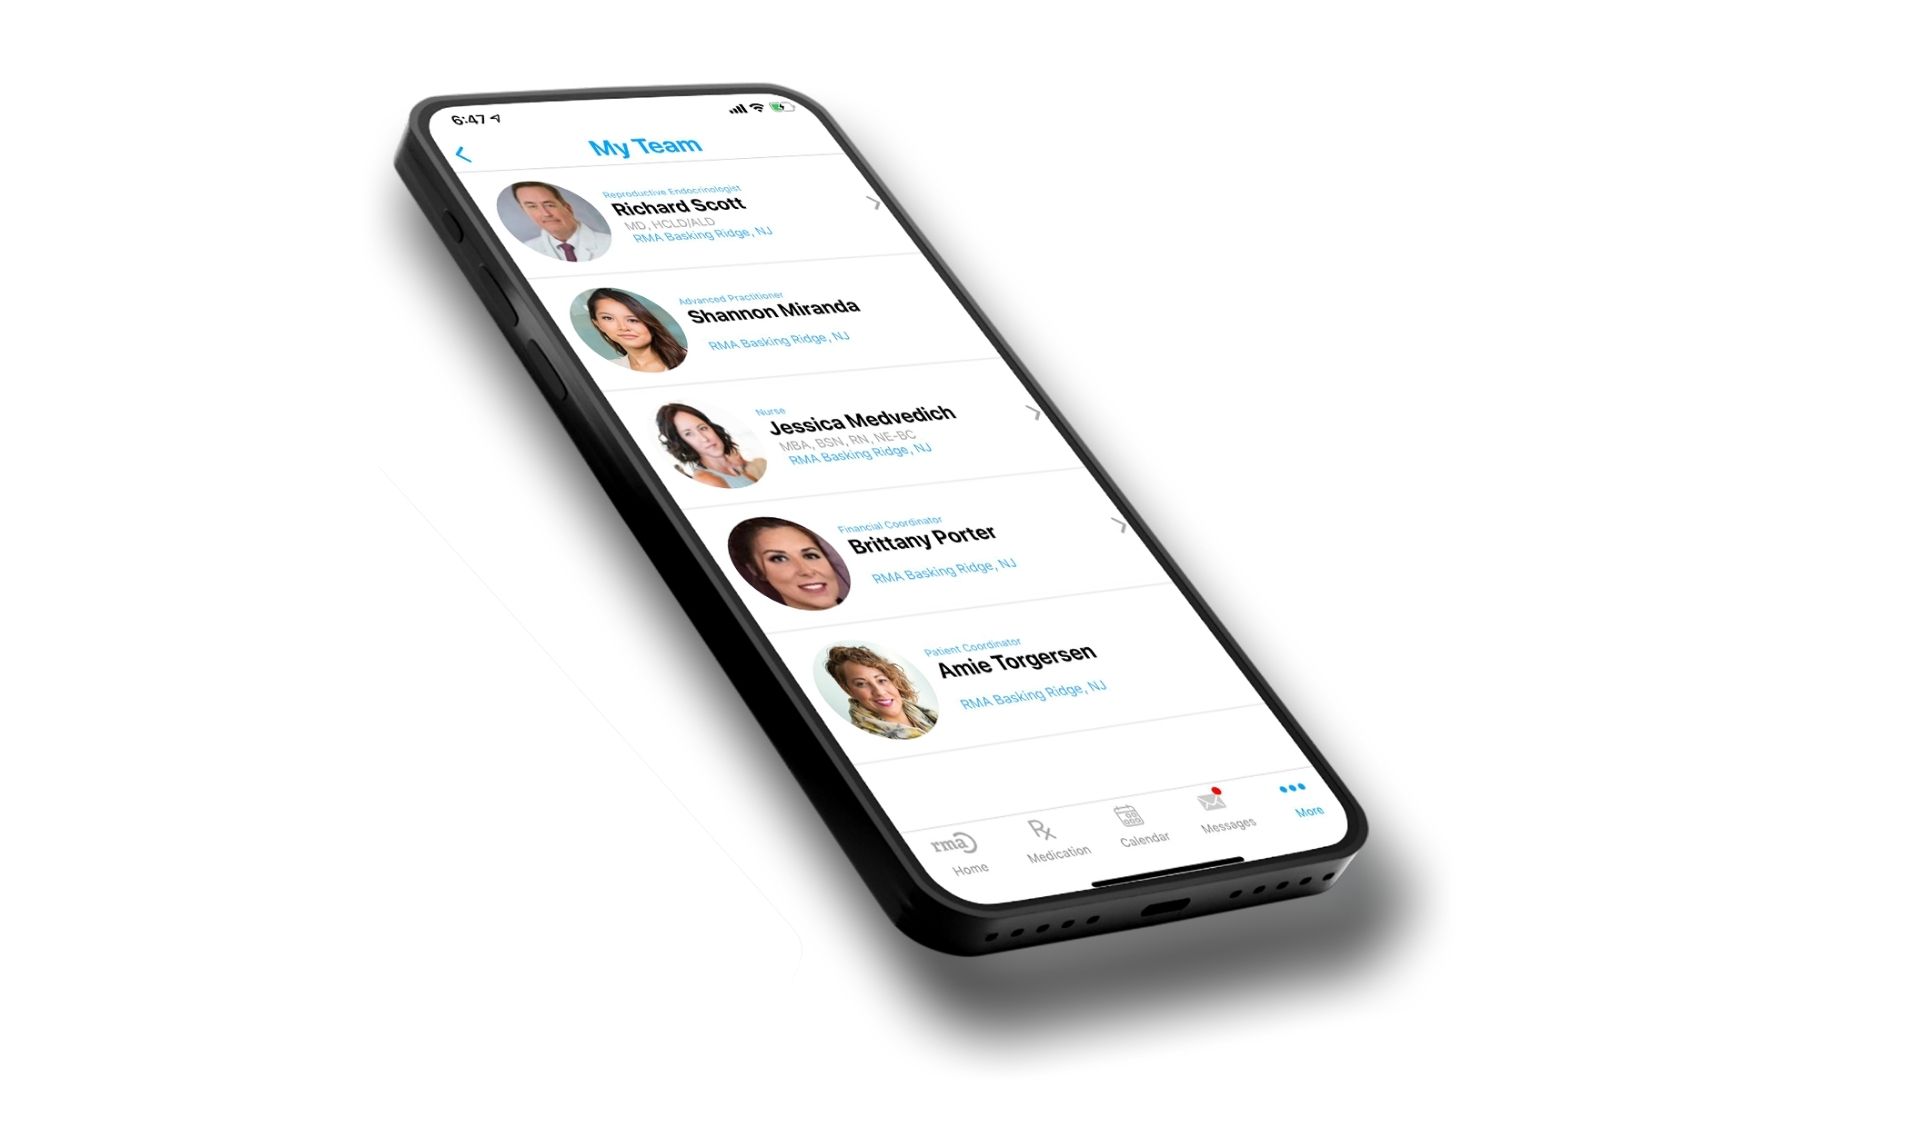 rma fertility app chat with doctors